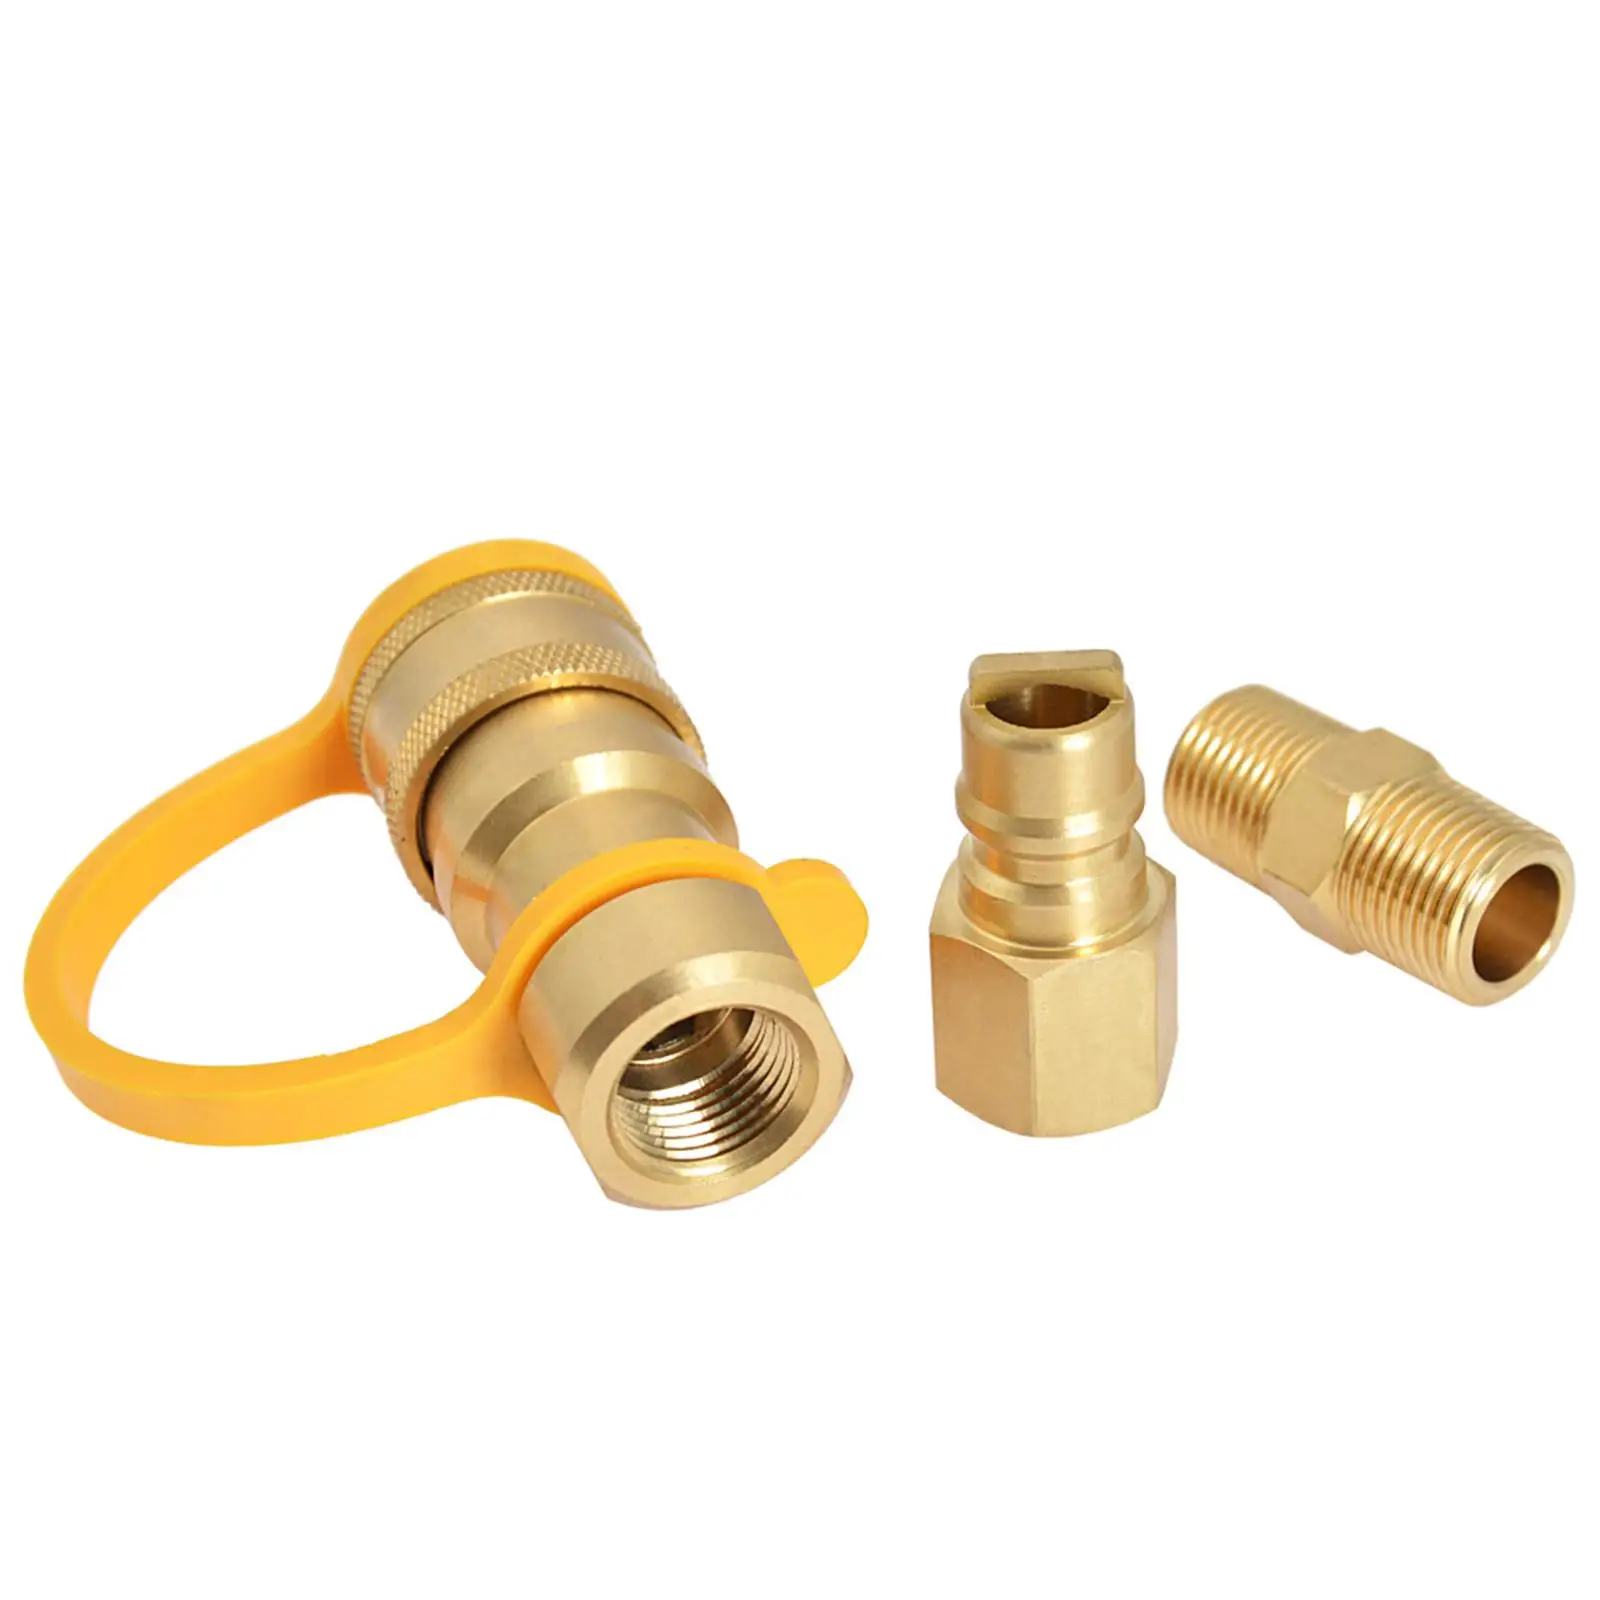 Propane Disposal Adapter Fitting 3/8 inch Gas Quick Connect Fittings for Fire